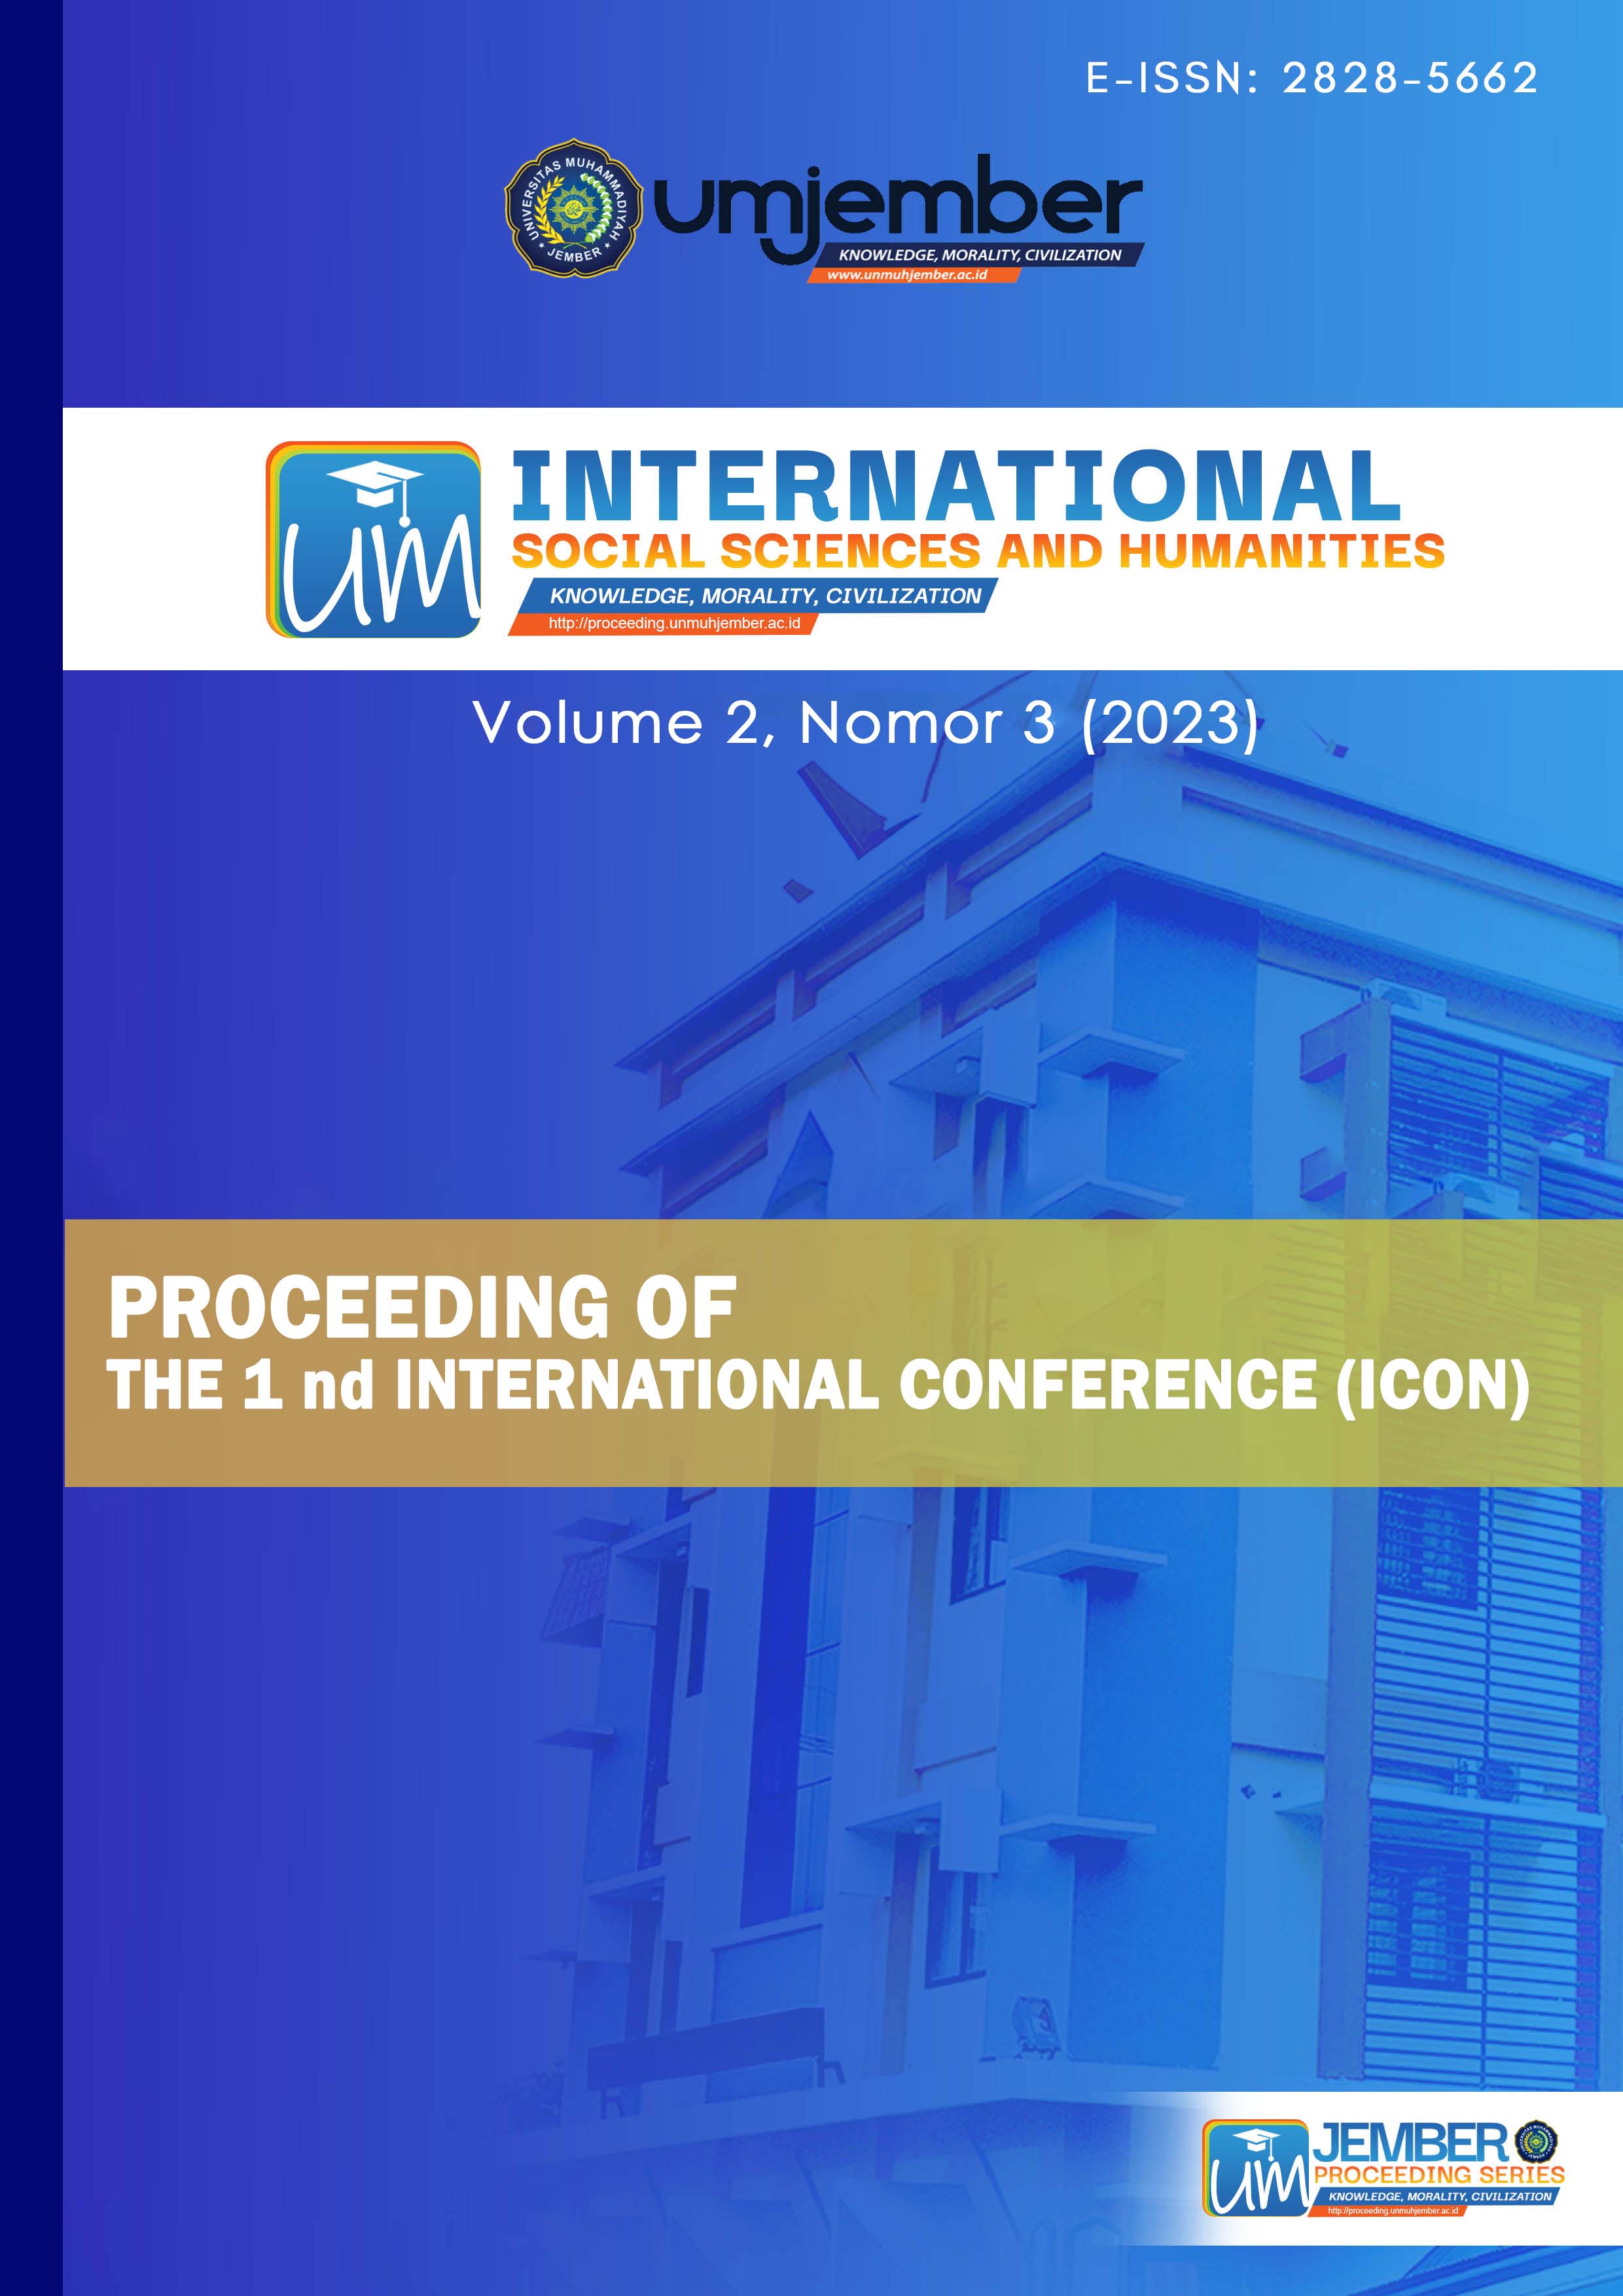 					View Vol. 2 No. 3 (2023): Proceedings of  International Conference (ICON)
				